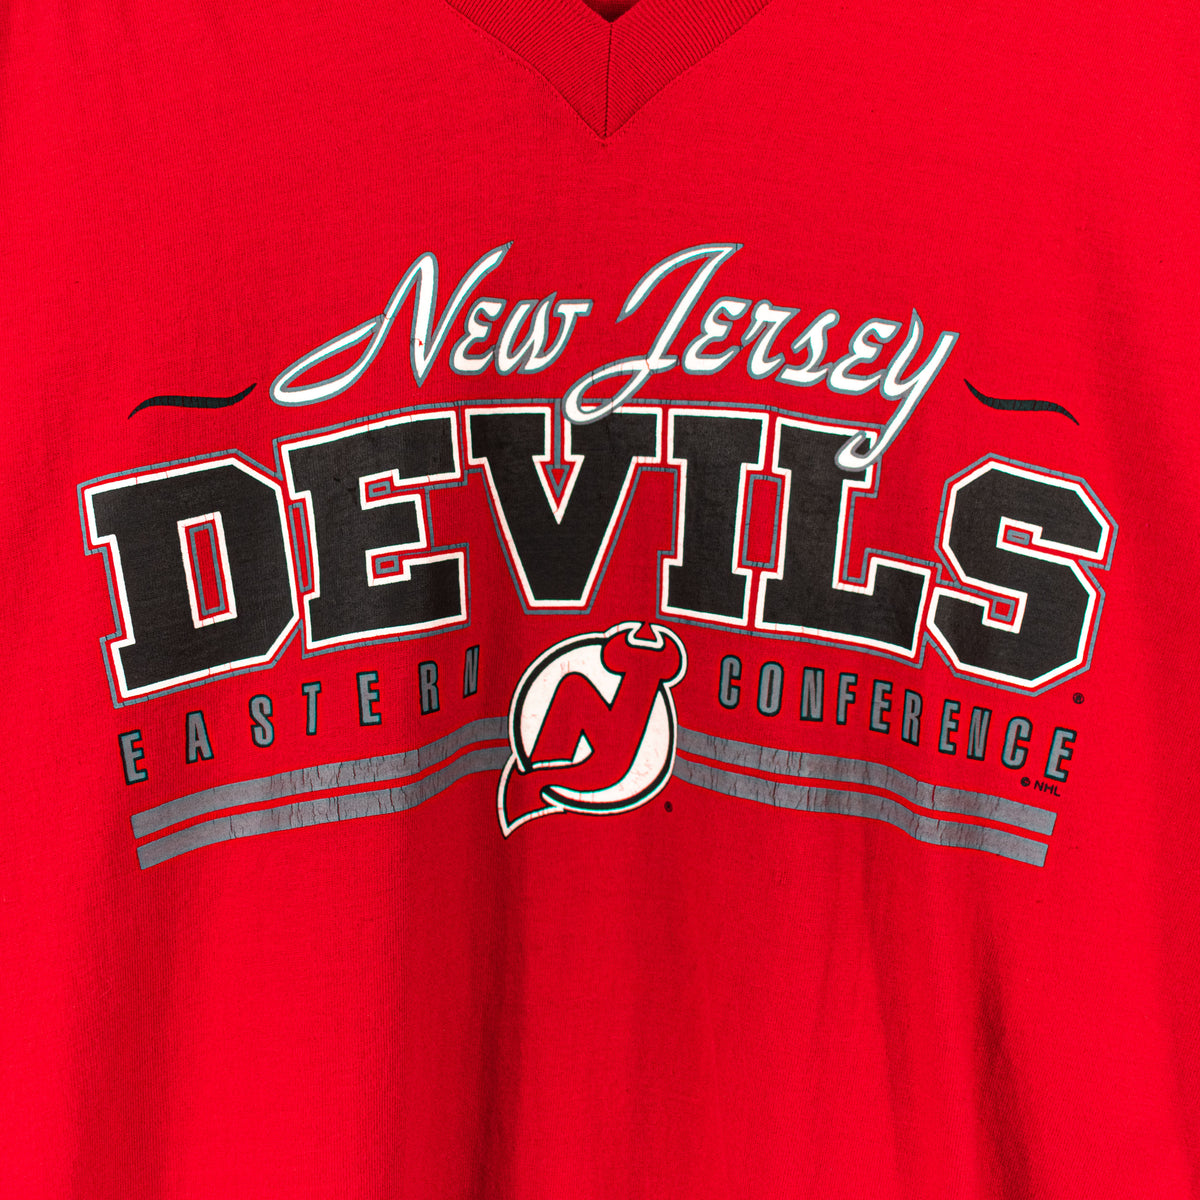 New Jersey Devils T-Shirts in New Jersey Devils Team Shop 